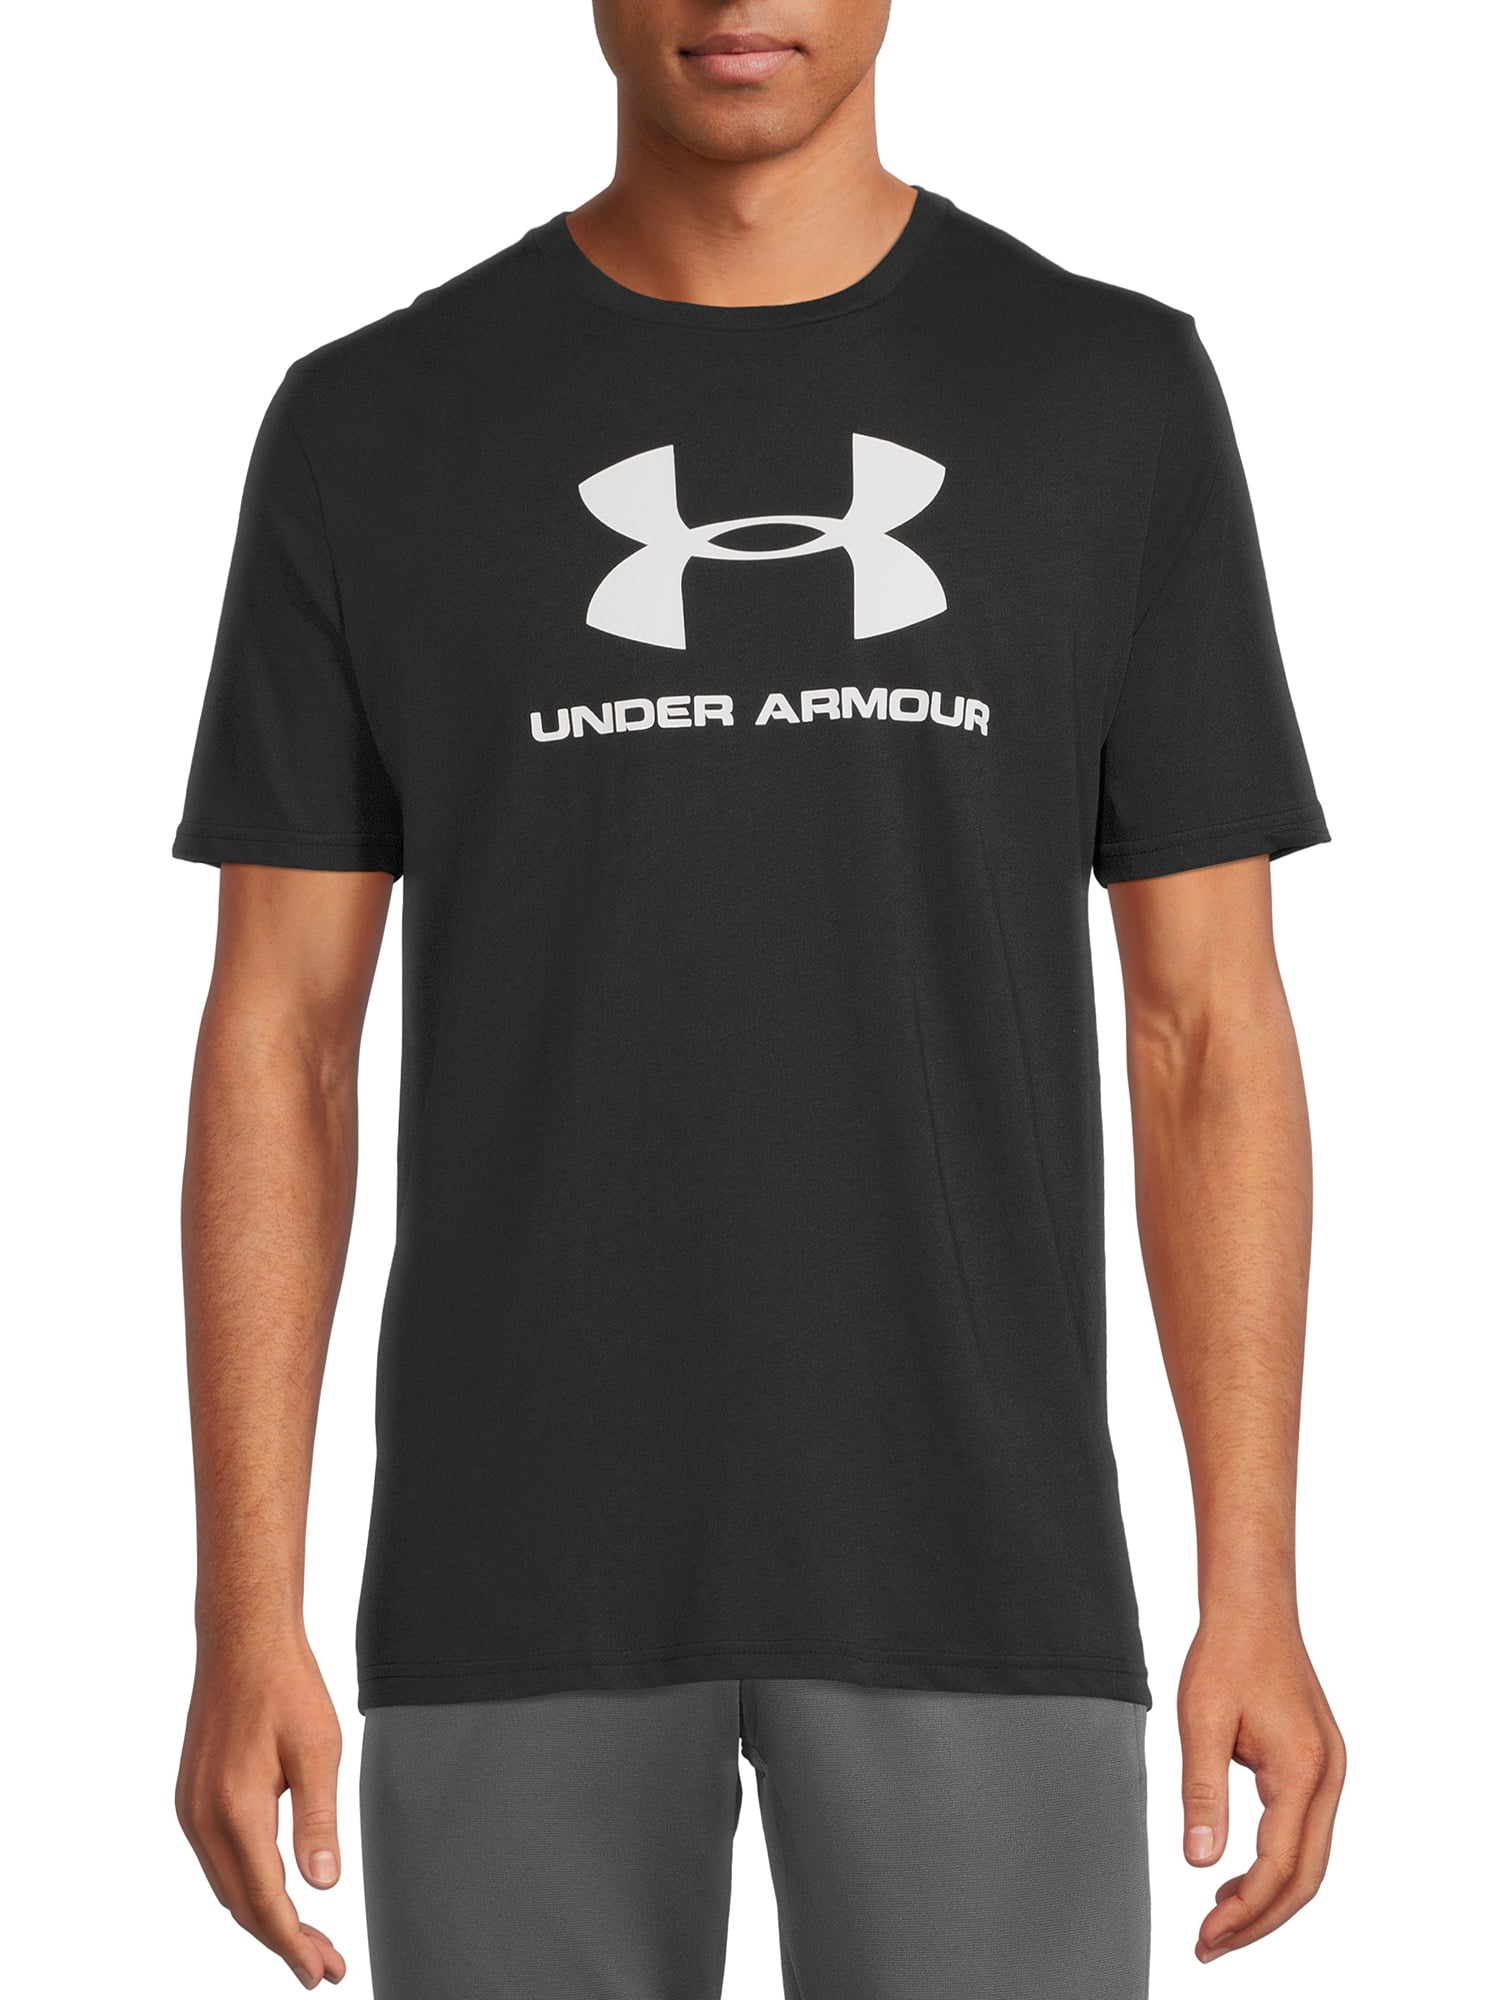 New Under Armour Boy's Graphic Print Athletic Shirt SIZE S,M,L,XL MSRP:$25.00 